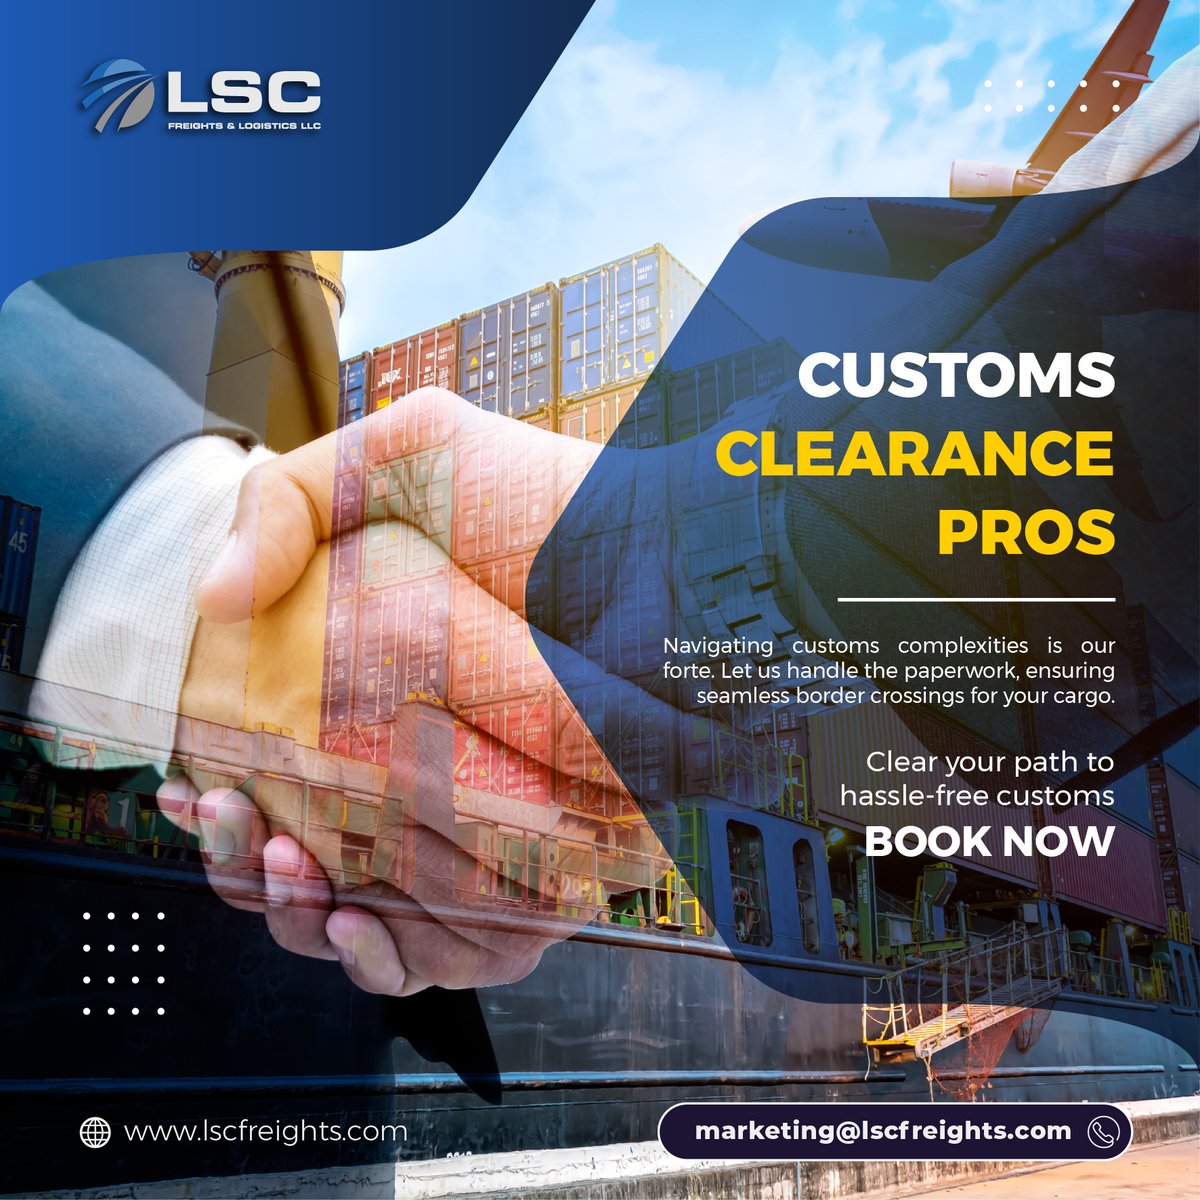 Seamless Customs Clearance Assistance 🛃🌍✈️

📩 Reach us at marketing@lscfreights.com or dial +971 4329 8666.
Embark on limitless logistics at wwww.lscfreights.com 🌐 #LSCFreights  #CustomsClearance #GlobalClearance #EfficientProcessing #SmoothLogistics #CustomsAssistance